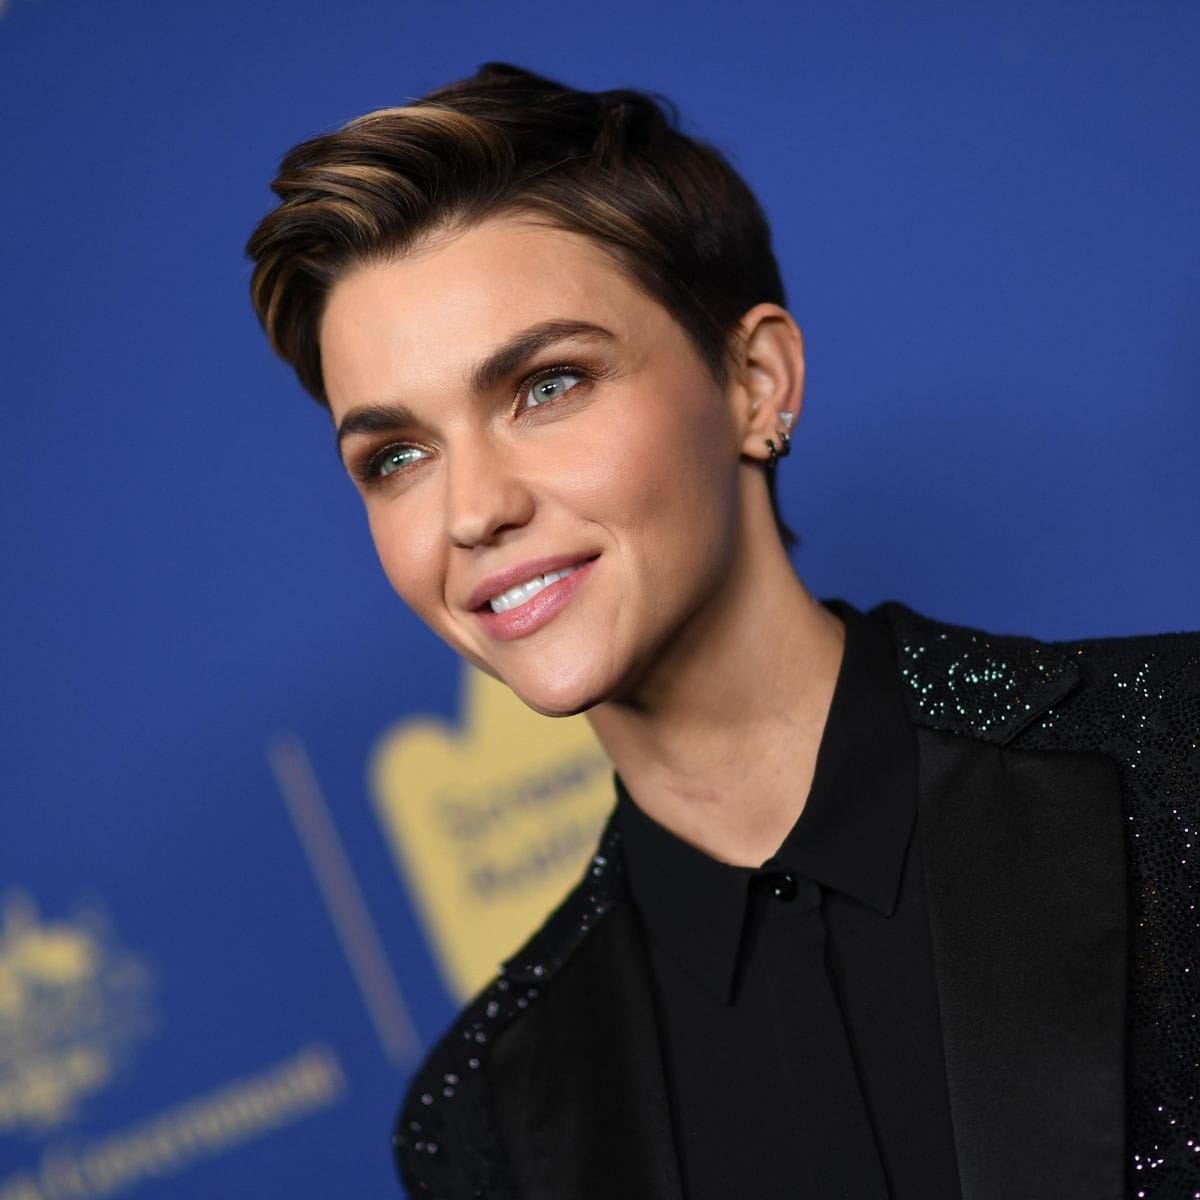 Ruby Rose: They/She